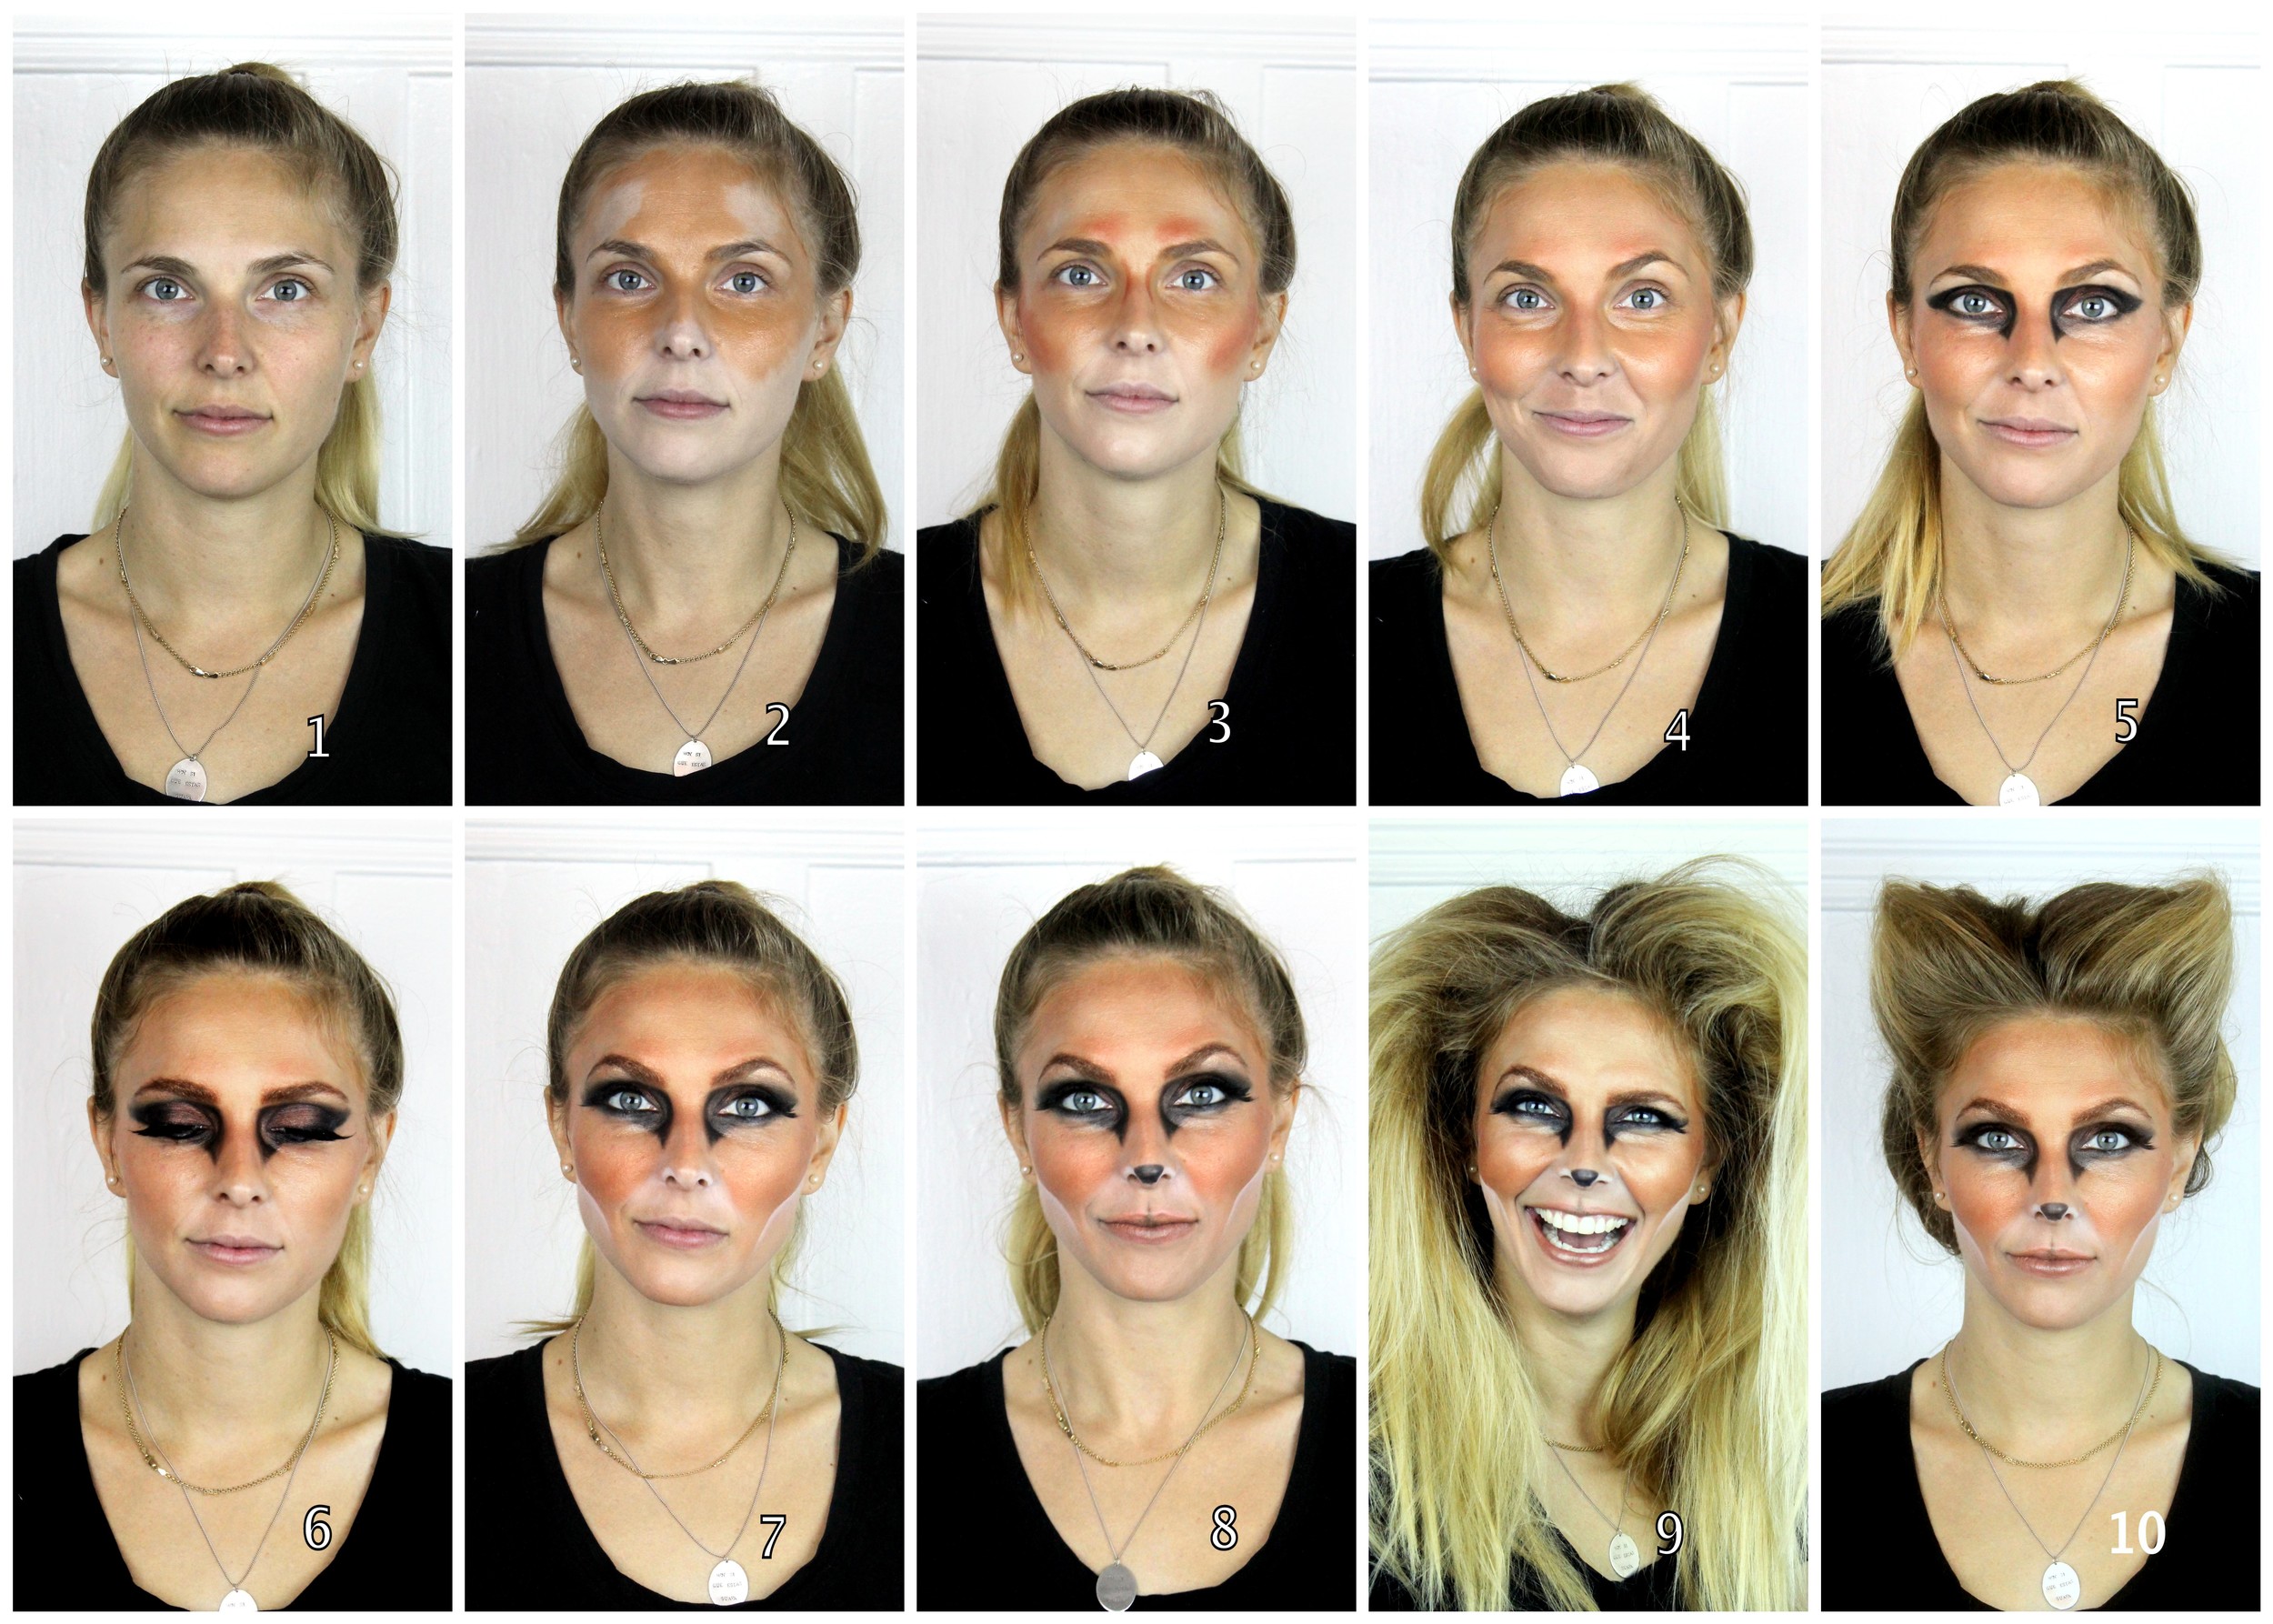 Fox Face Paint Tutorial- Step-by-Step